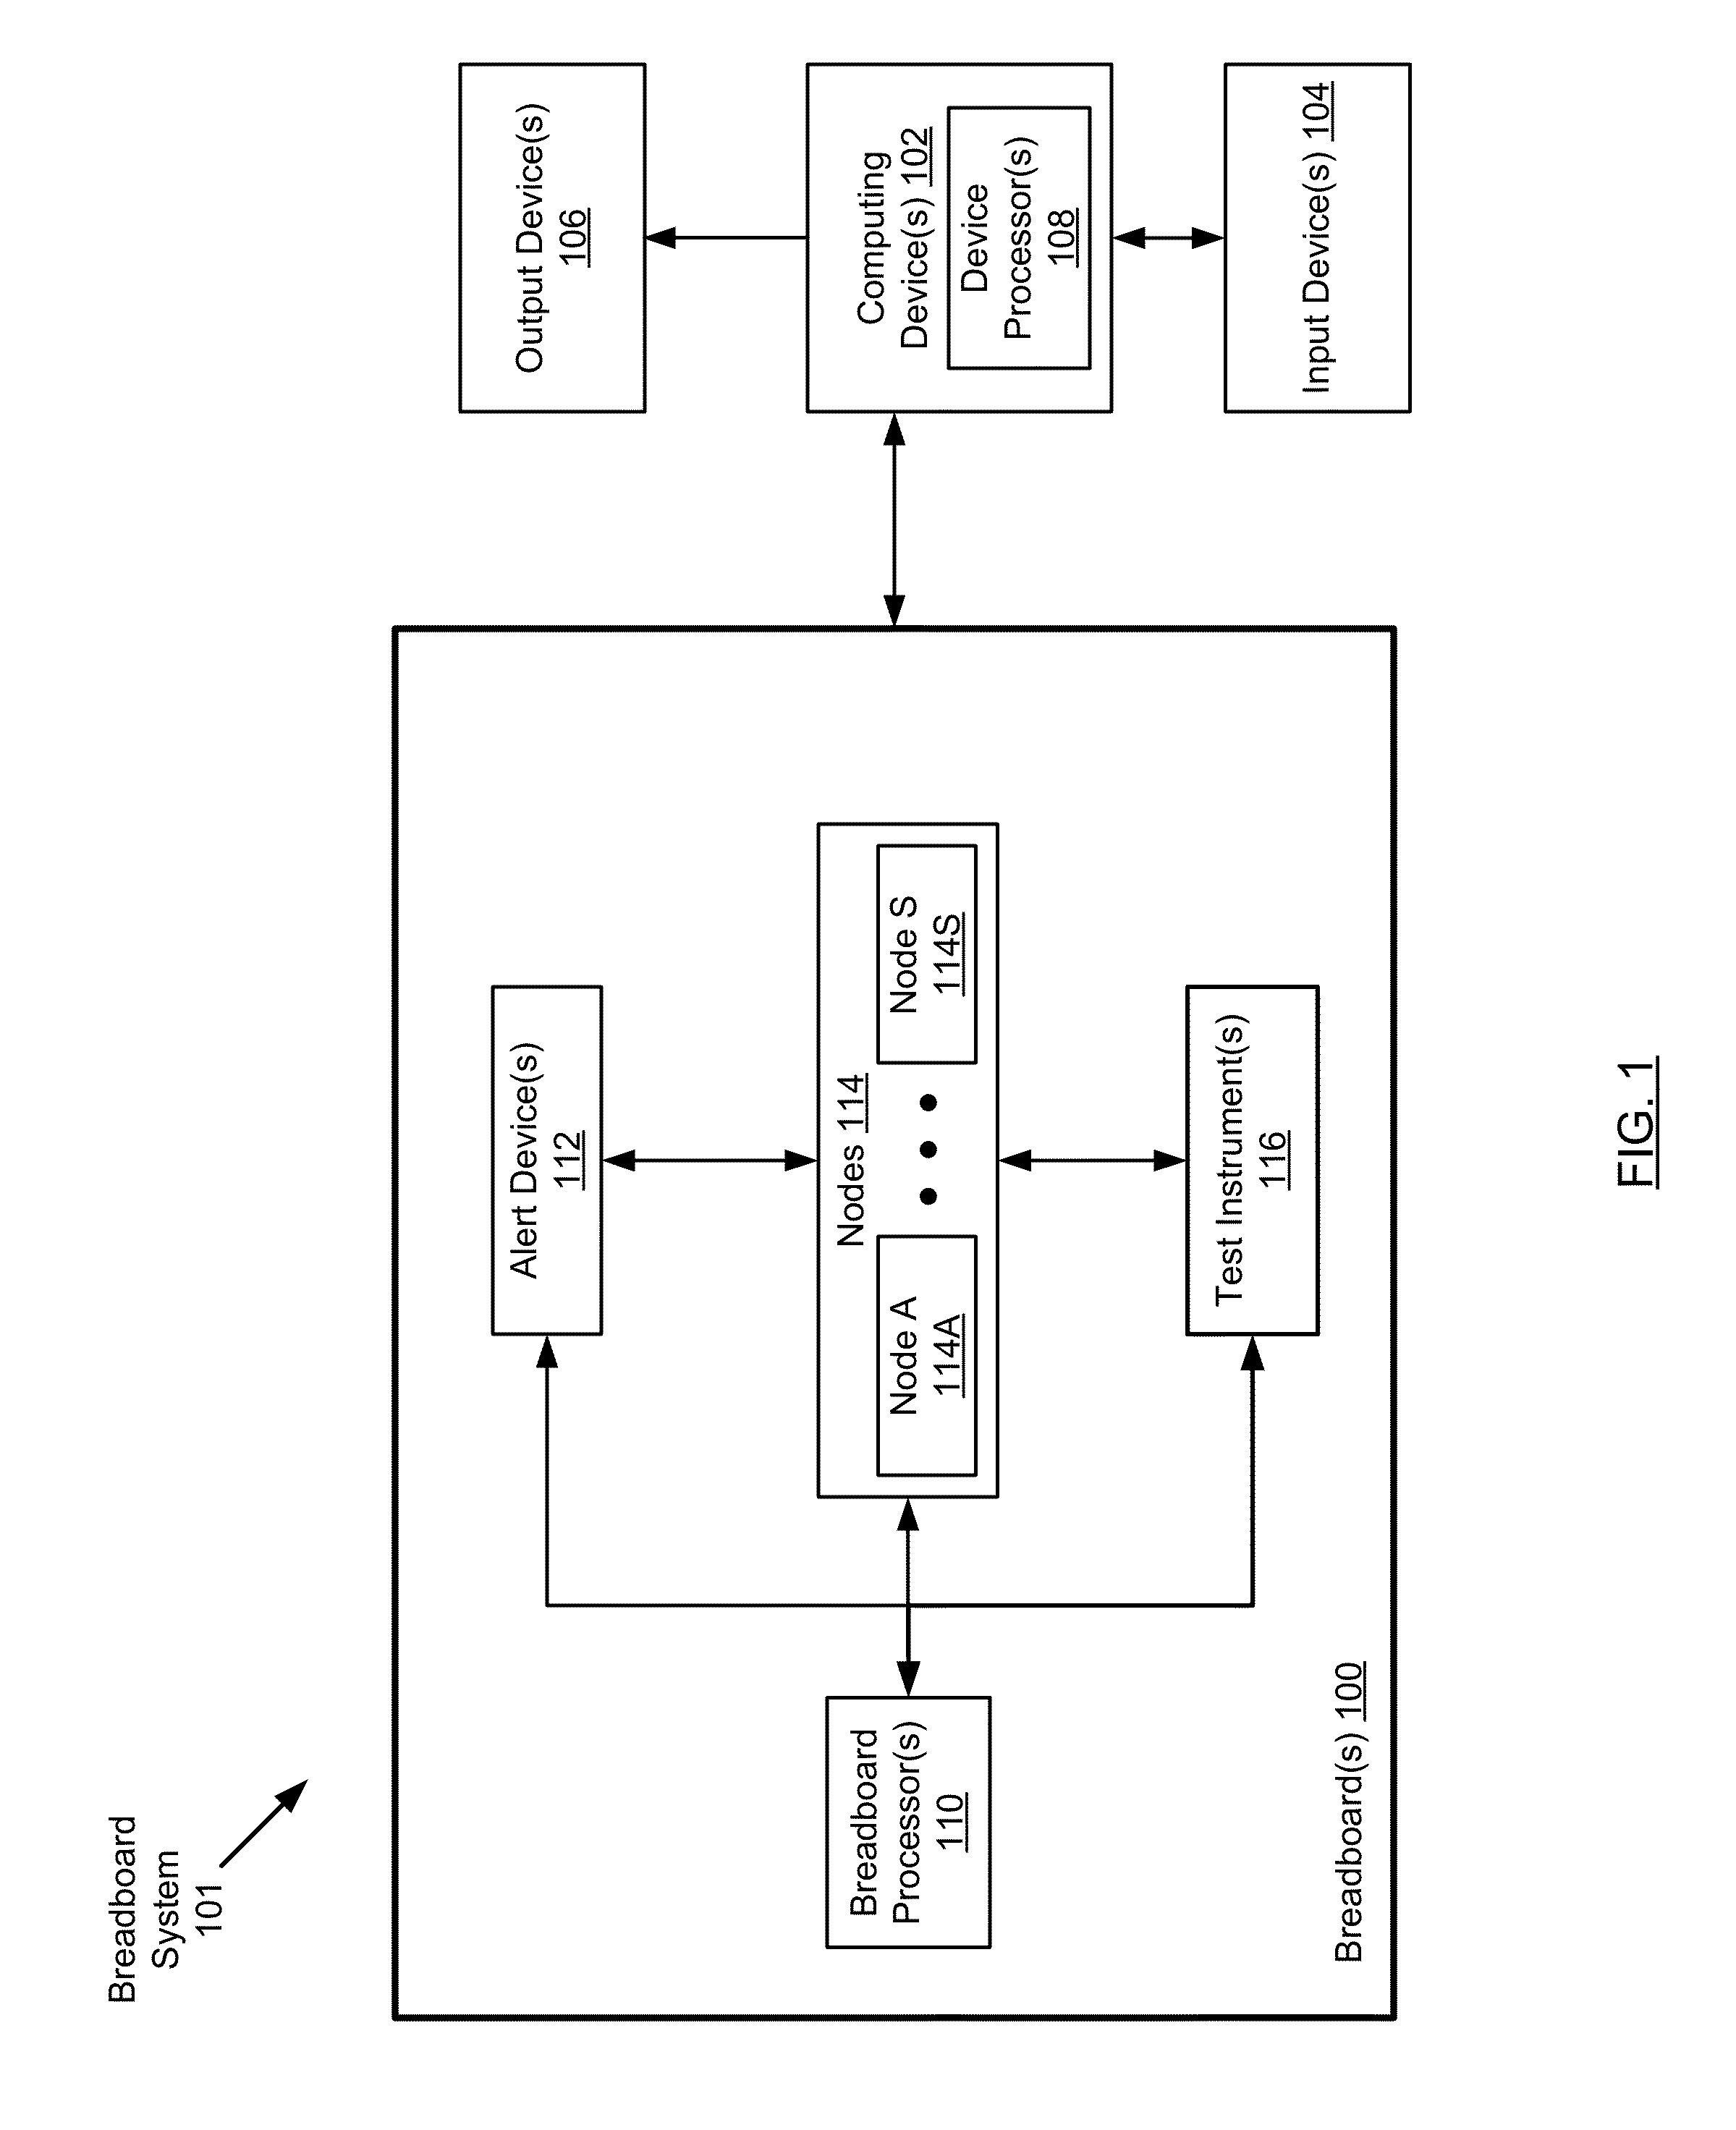 Method and system for using a breadboard